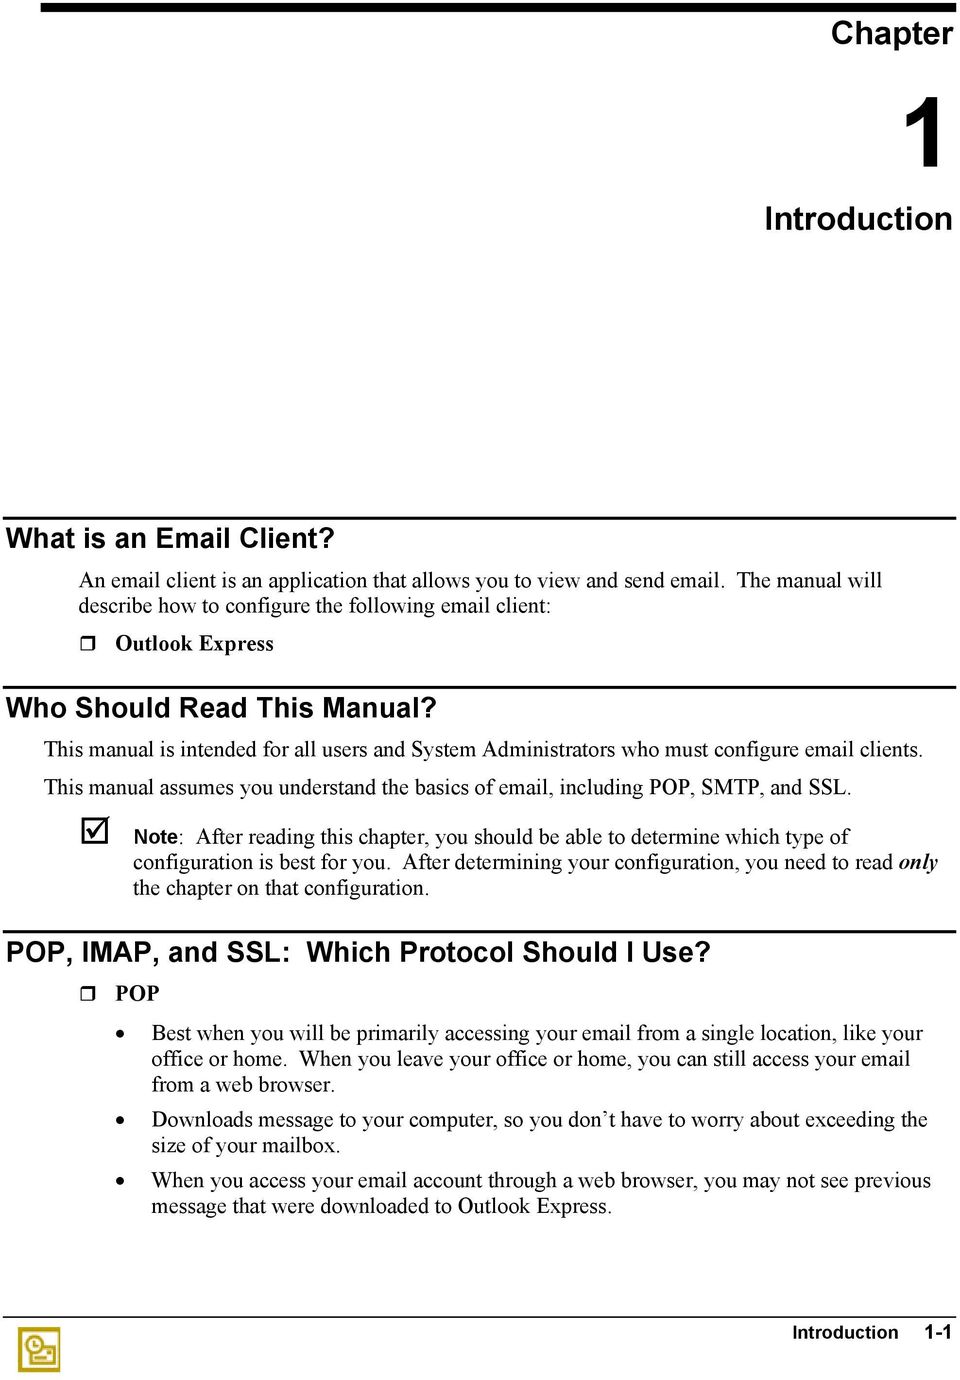 This manual is intended for all users and System Administrators who must configure email clients. This manual assumes you understand the basics of email, including POP, SMTP, and SSL.